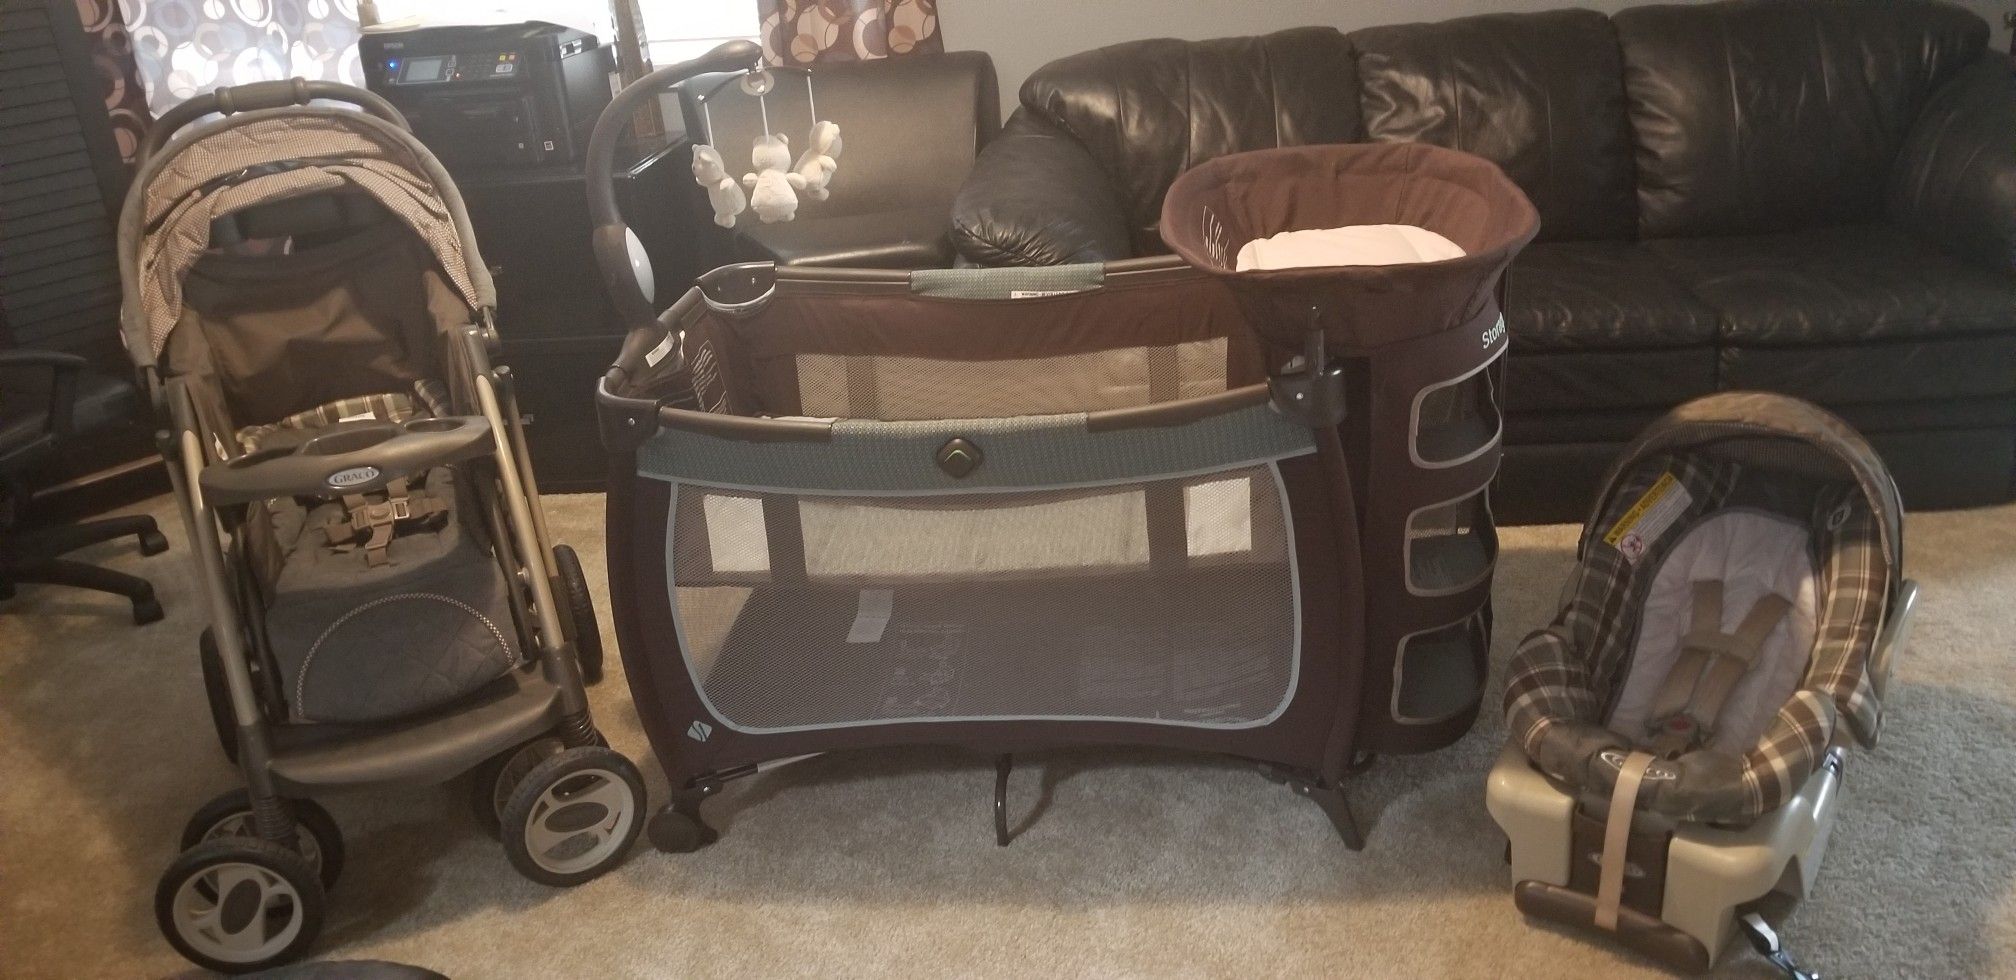 Matching stroller, pack and play and car seat